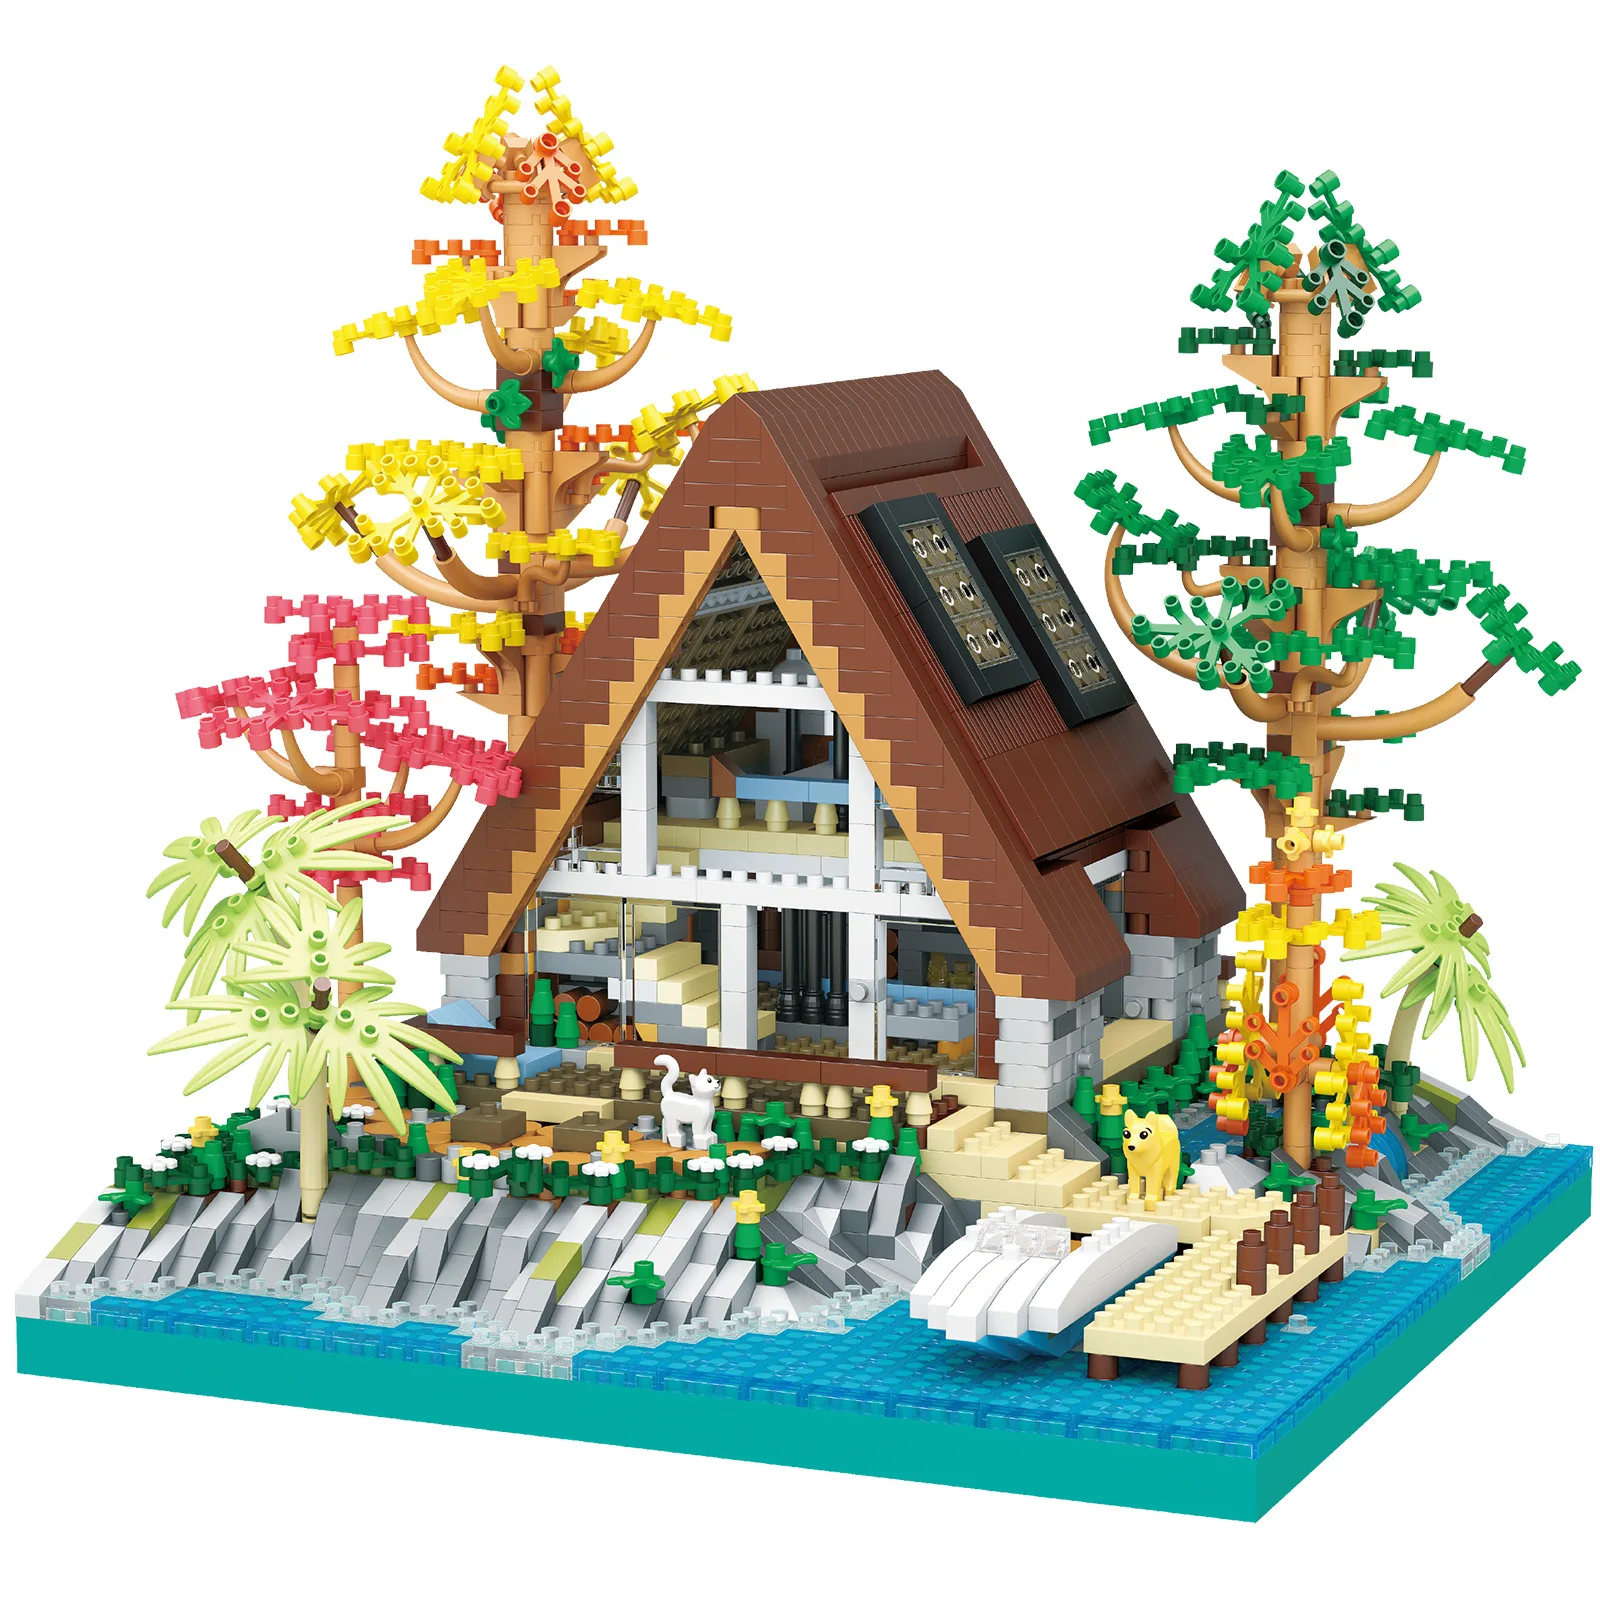 Creative City Street View House Micro Diamond Block Lakeside Cabin Streetscape Model Building Brick Figures Toy For Kids Gifts